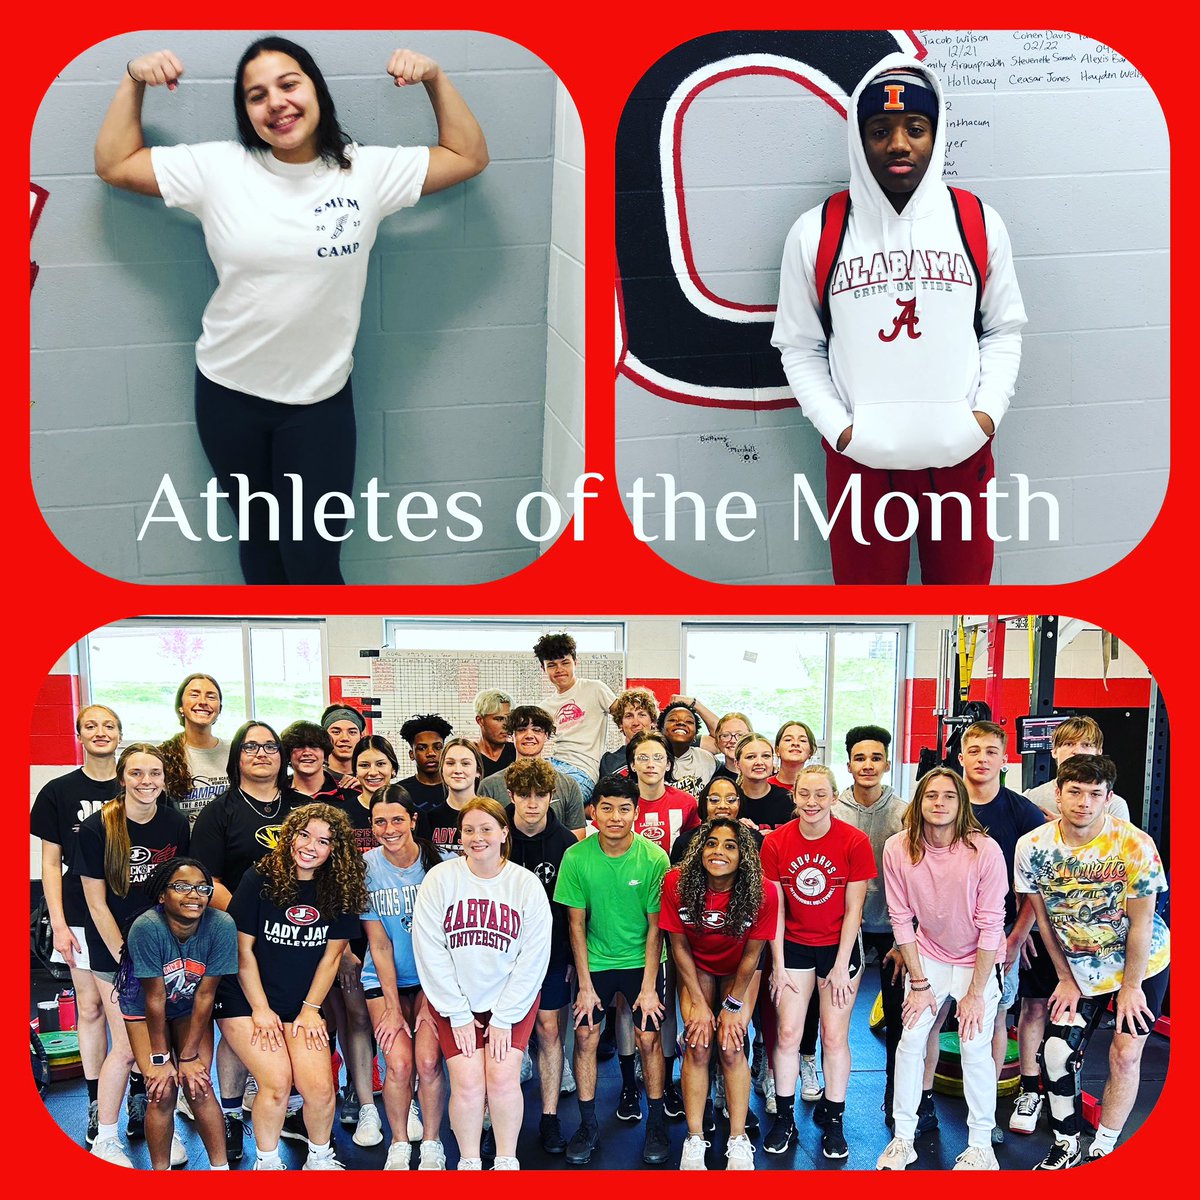 Shout out to our Athletes of the Month for December!! It came down to who performed the best at testing and 6th Block did very well in that category so they took home the award for best block this month. Female: Jada B ; Male: Kantrell J ; Group: 6th Block. #dominatetheday